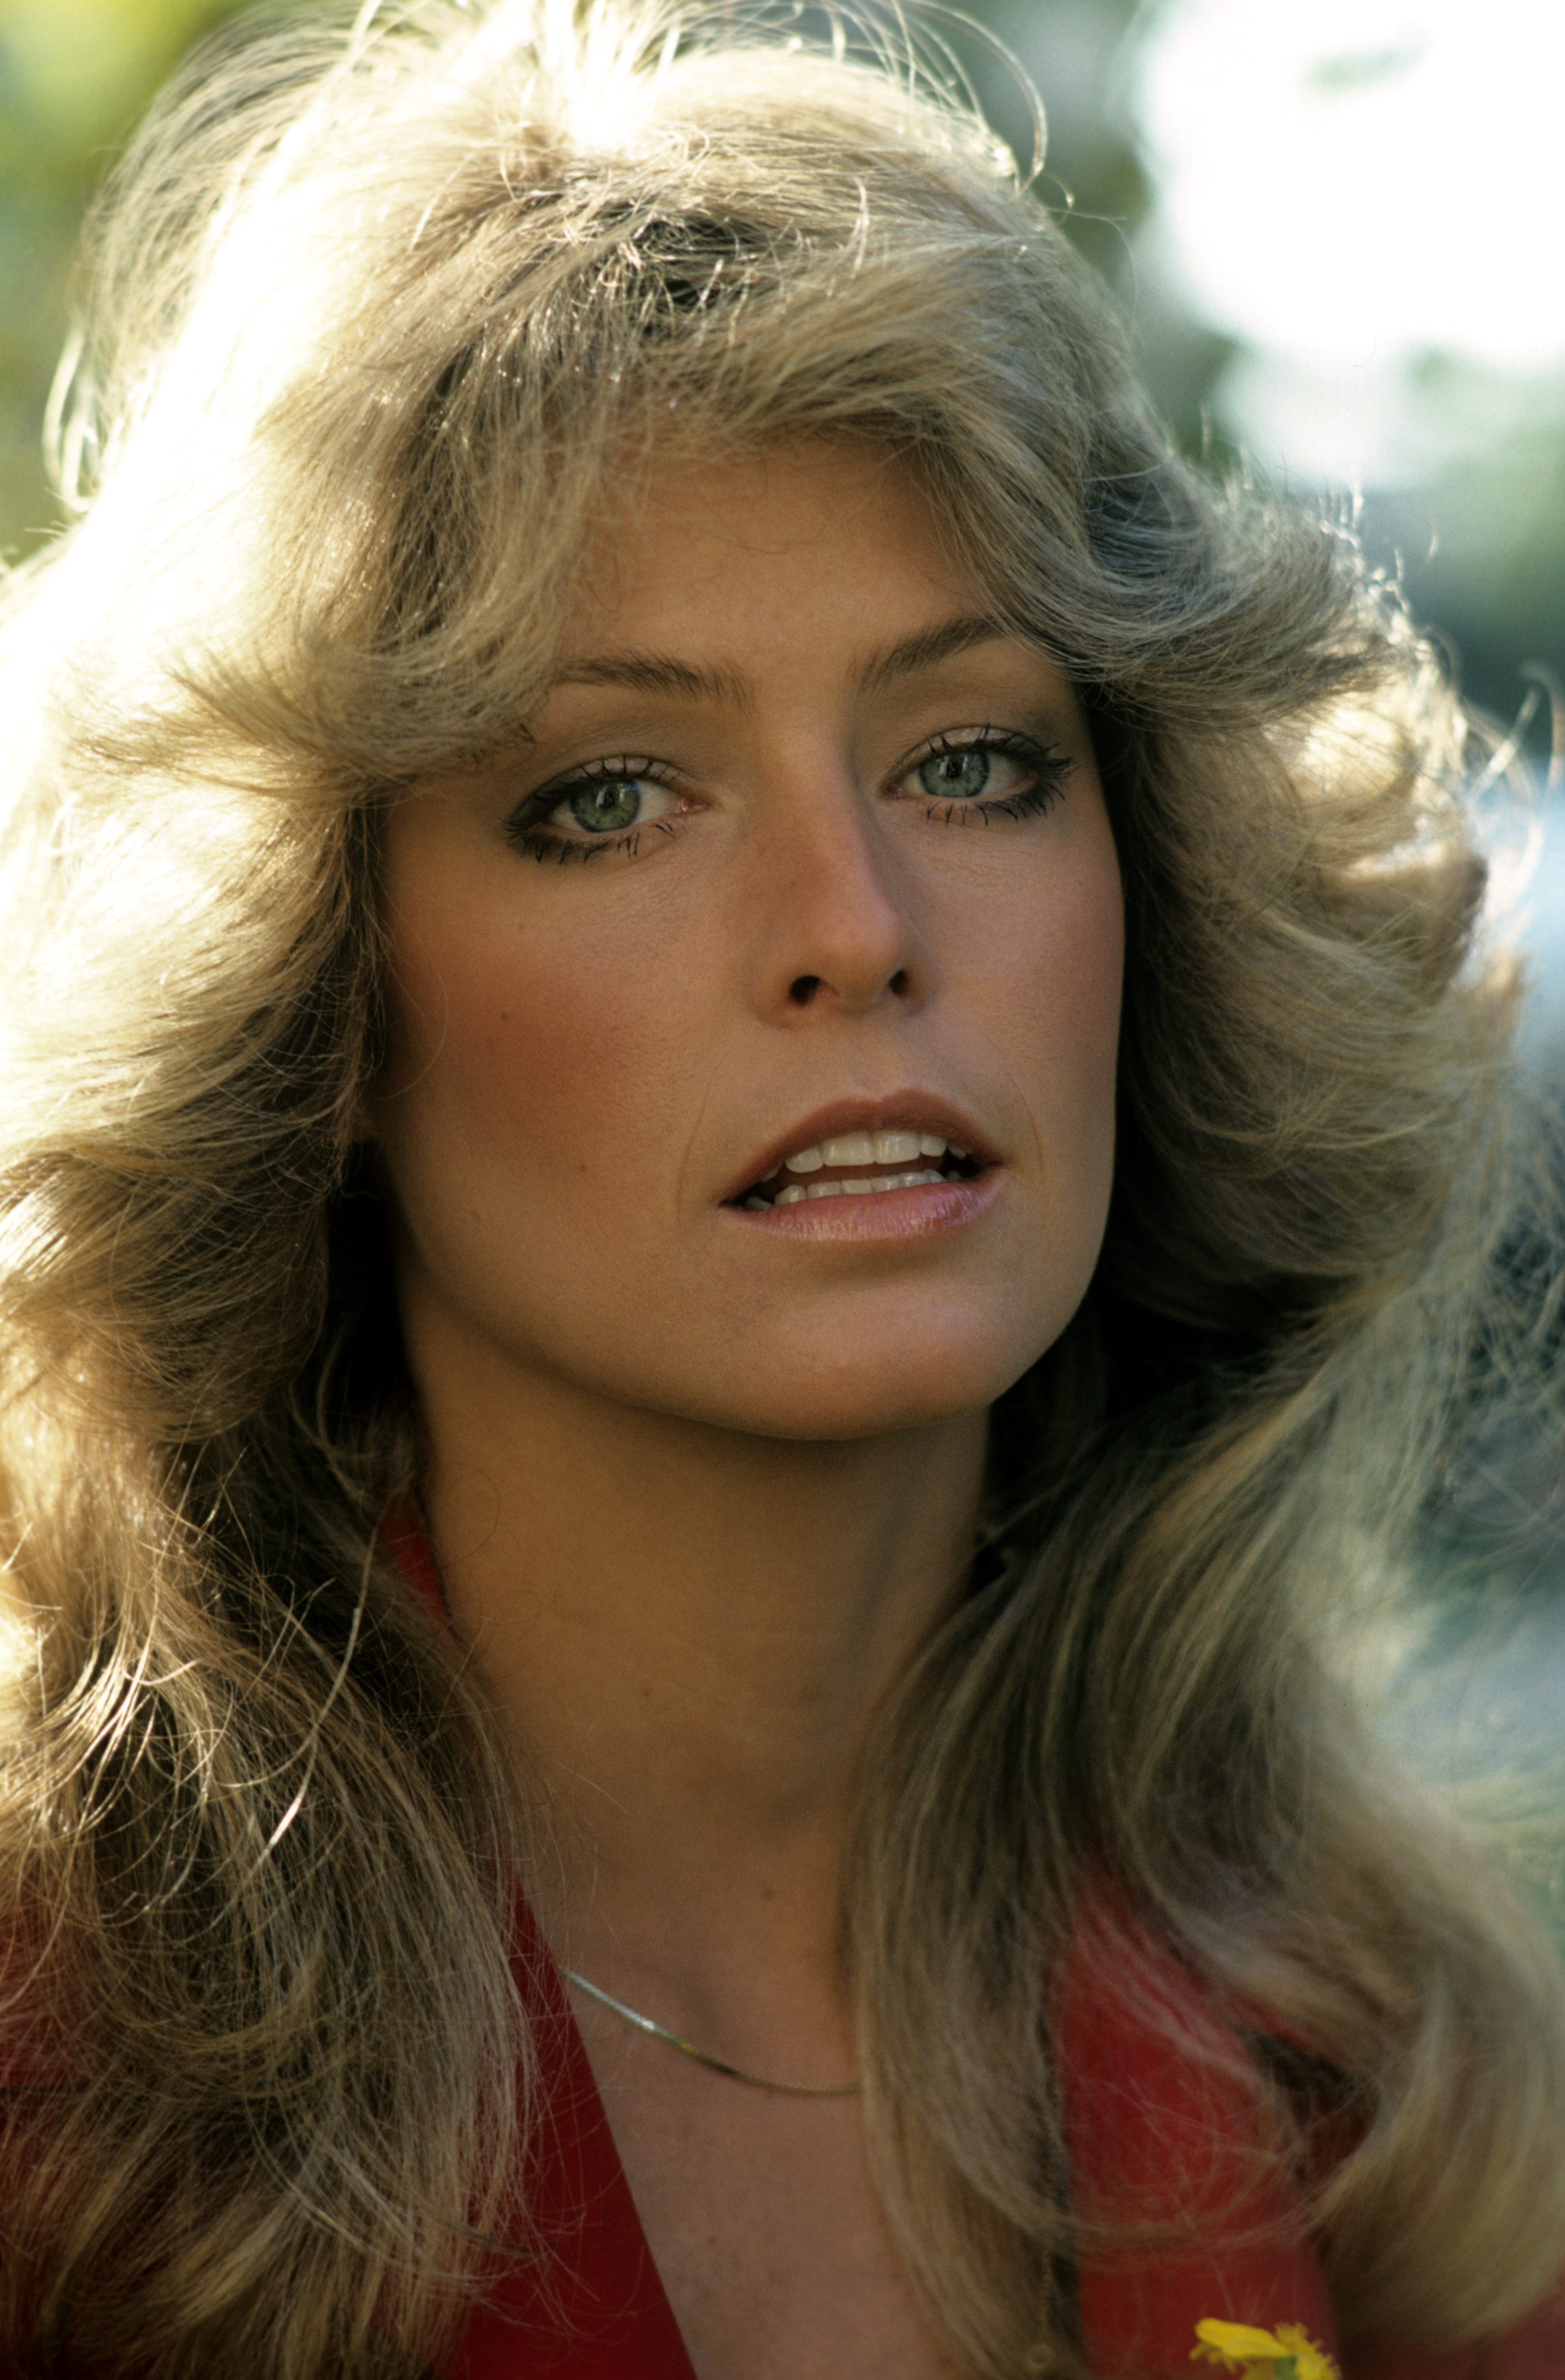 Farrah Fawcett on ABC's "Charlie's Angels" in June 15, 1976 | Source: Getty Images